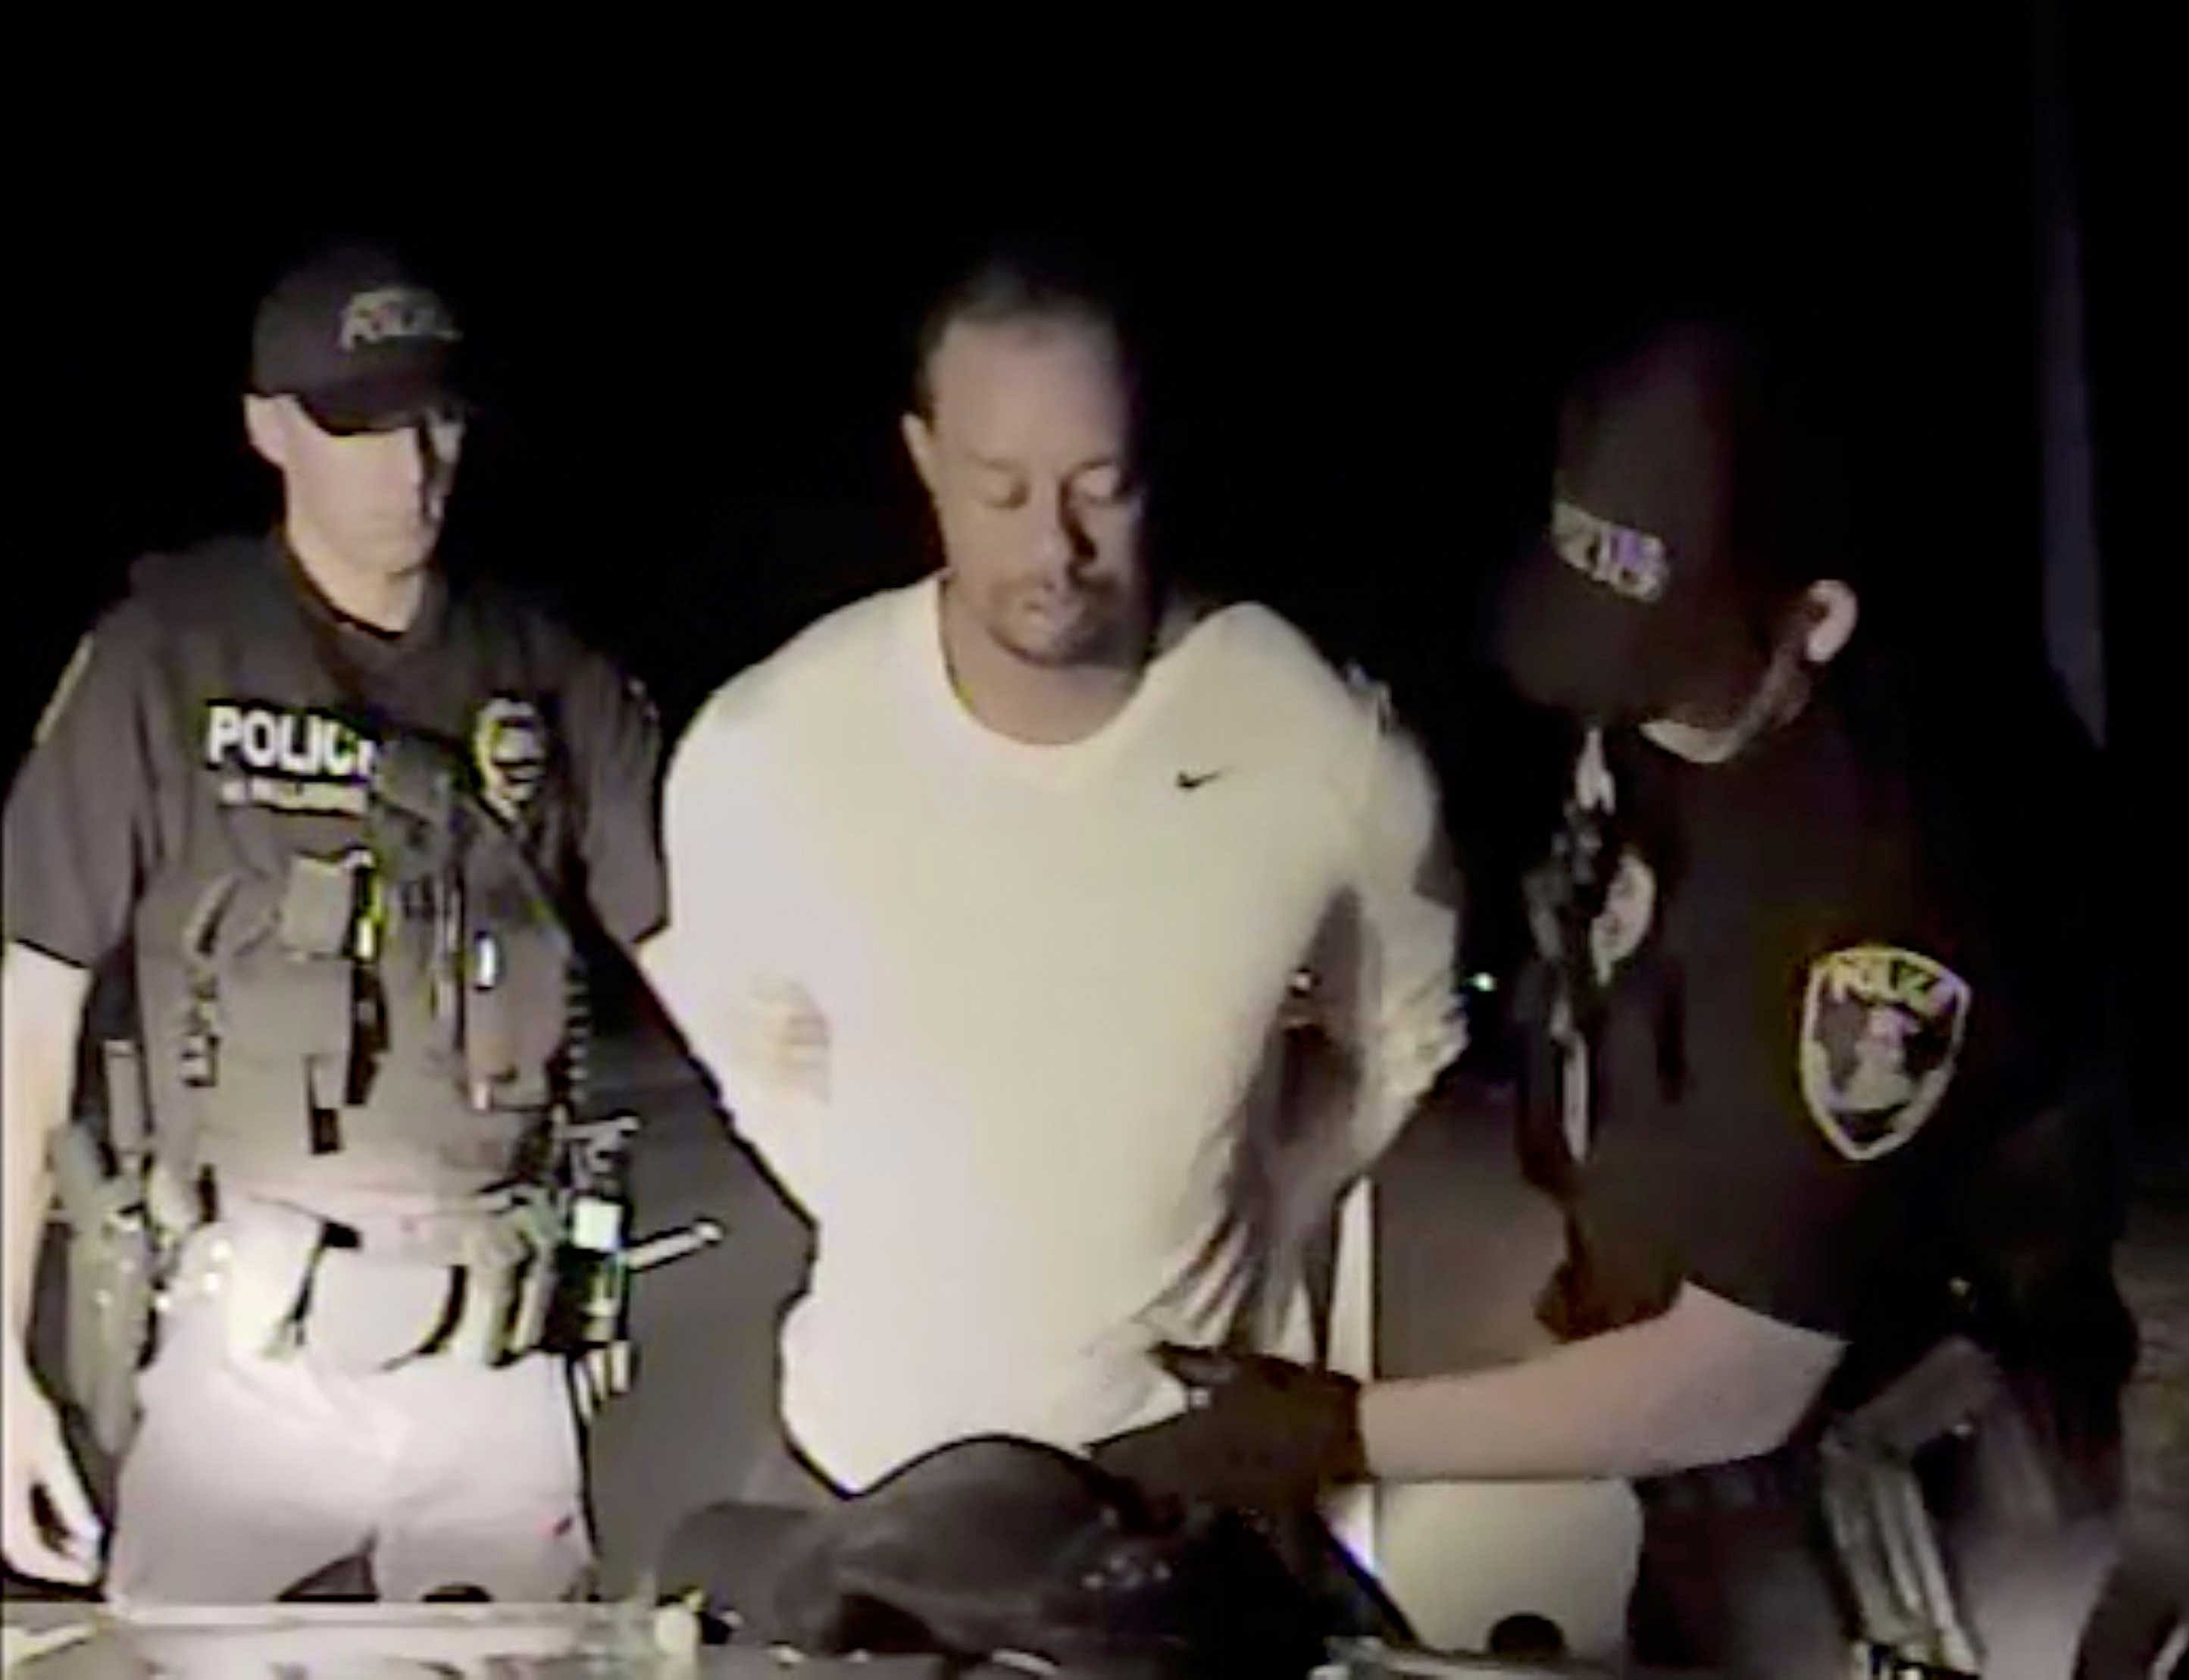 Tiger Woods is seen handcuffed and searched by police officers in this still image from police dashcam video in Jupiter, Florida, U.S. on May 29, 2017. Video released on May 31, 2017. Courtesy Jupiter Police Department/Handout via REUTERS